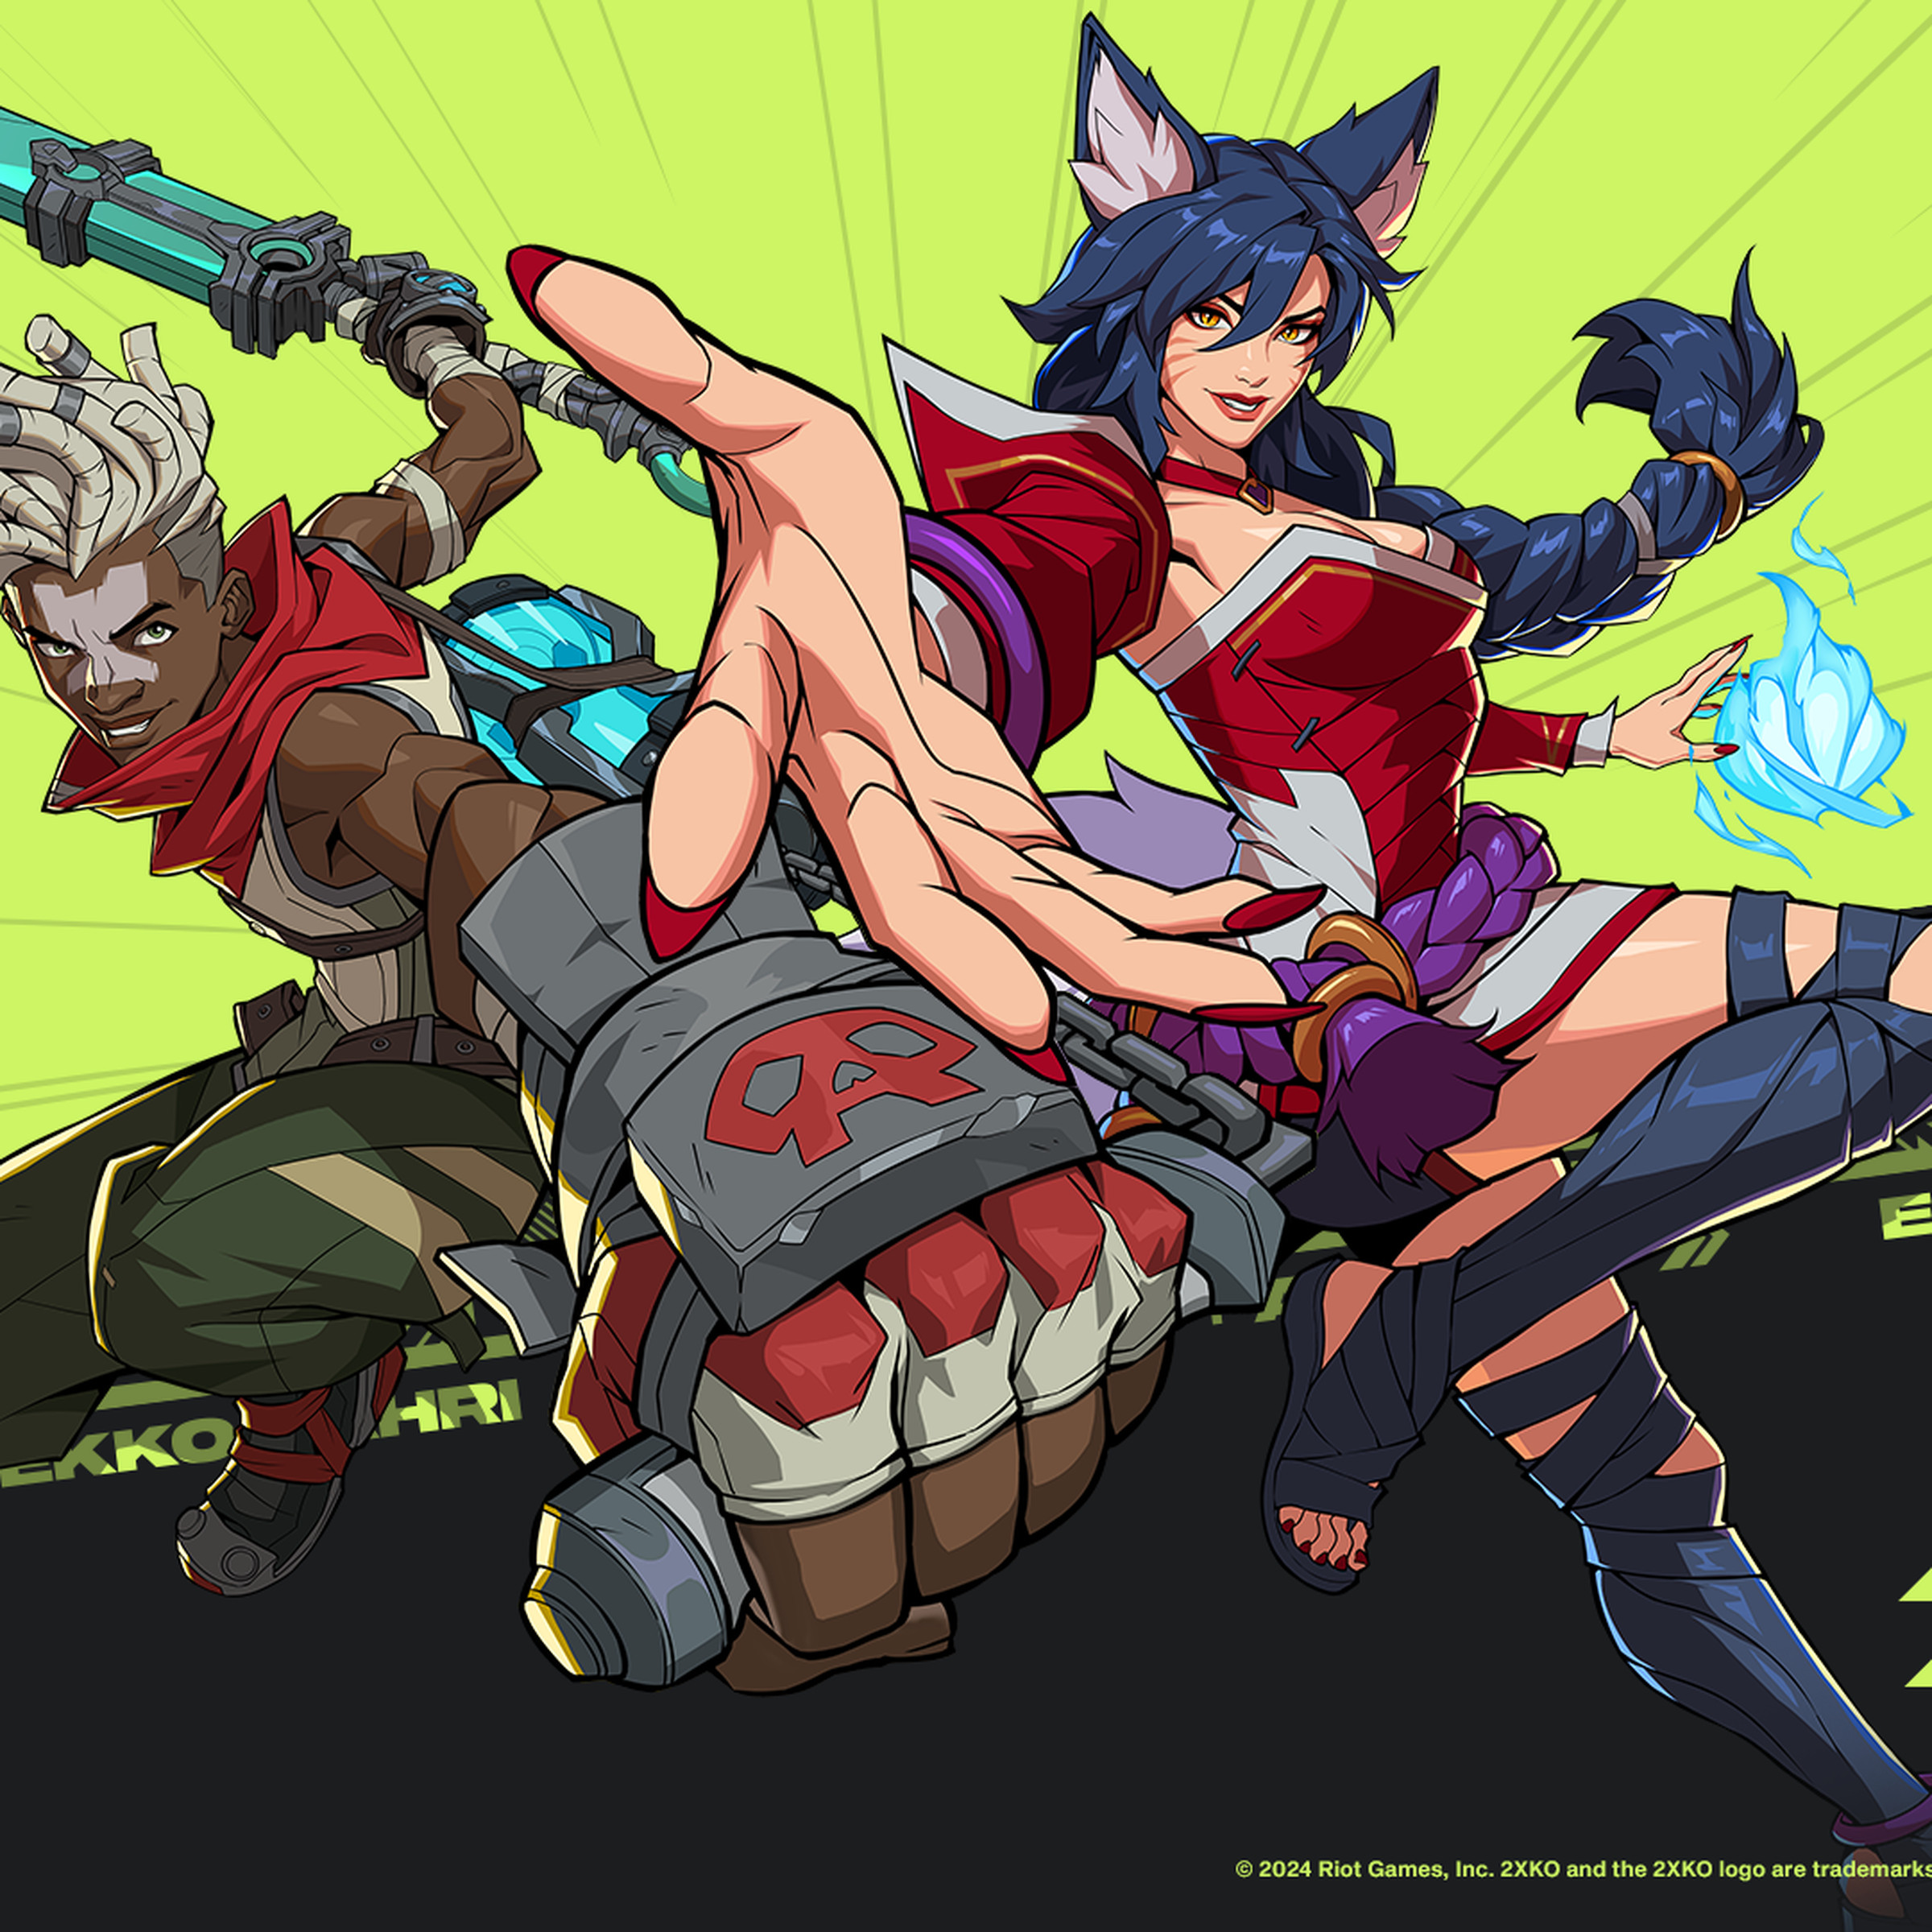 Image of two 2XKO characters Ekko an African man with darkskin and white dreadlocks next to Ahri a lightskinned woman with dark blue hair and fox ears. Both characters are reaching toward the viewer.